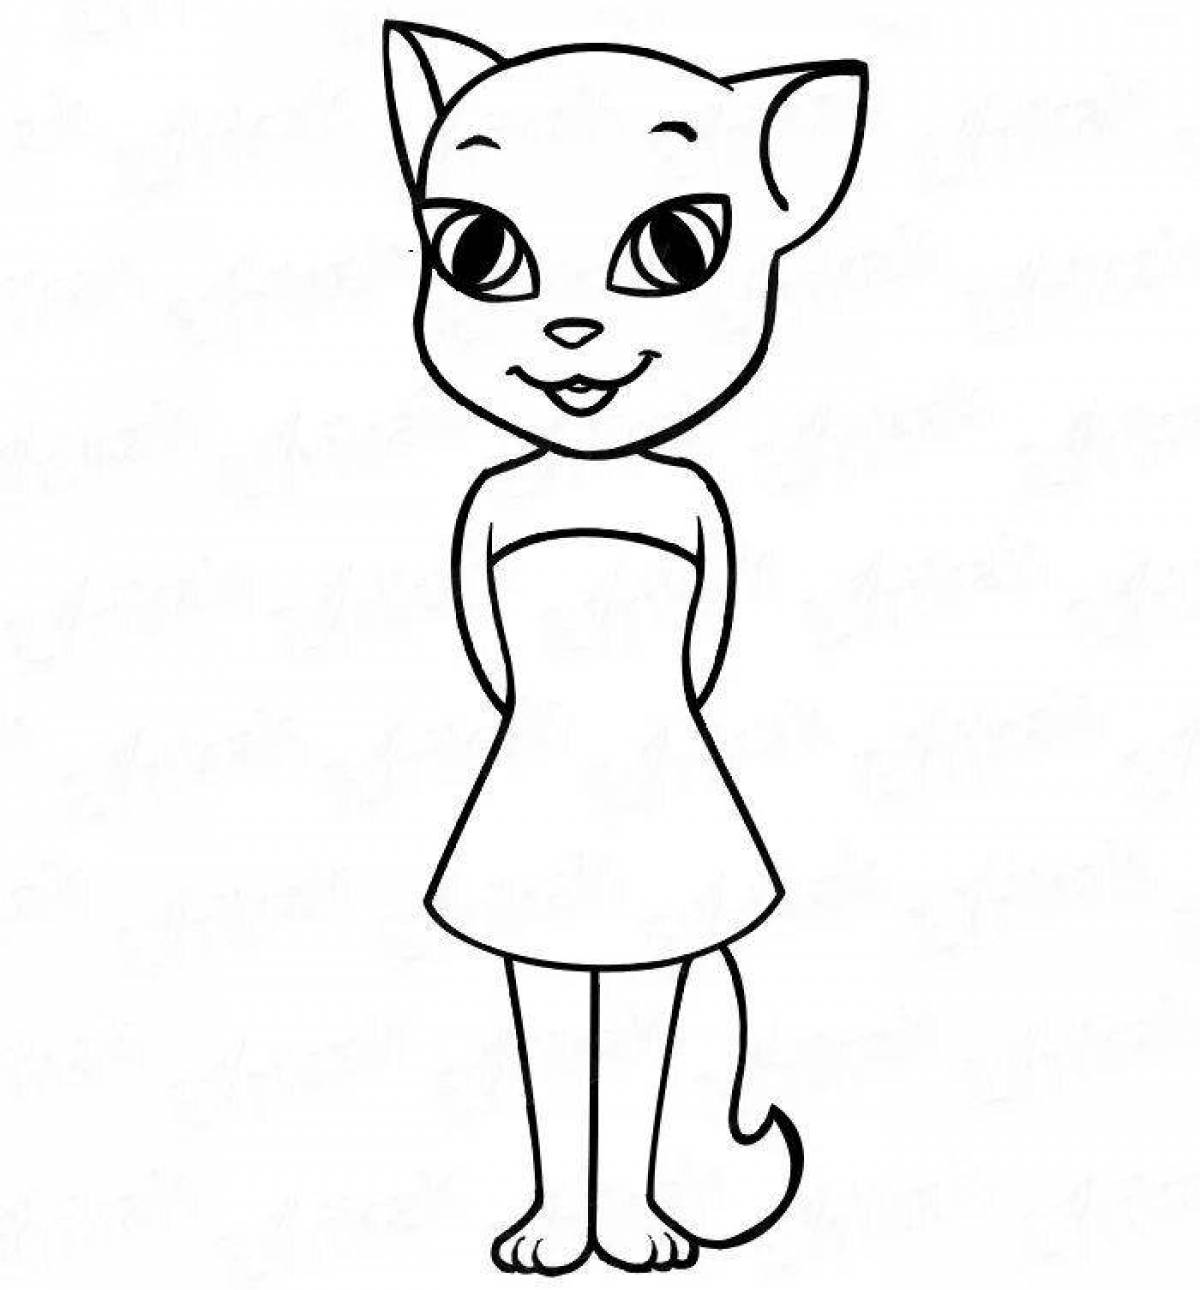 Angela colorful coloring page 2